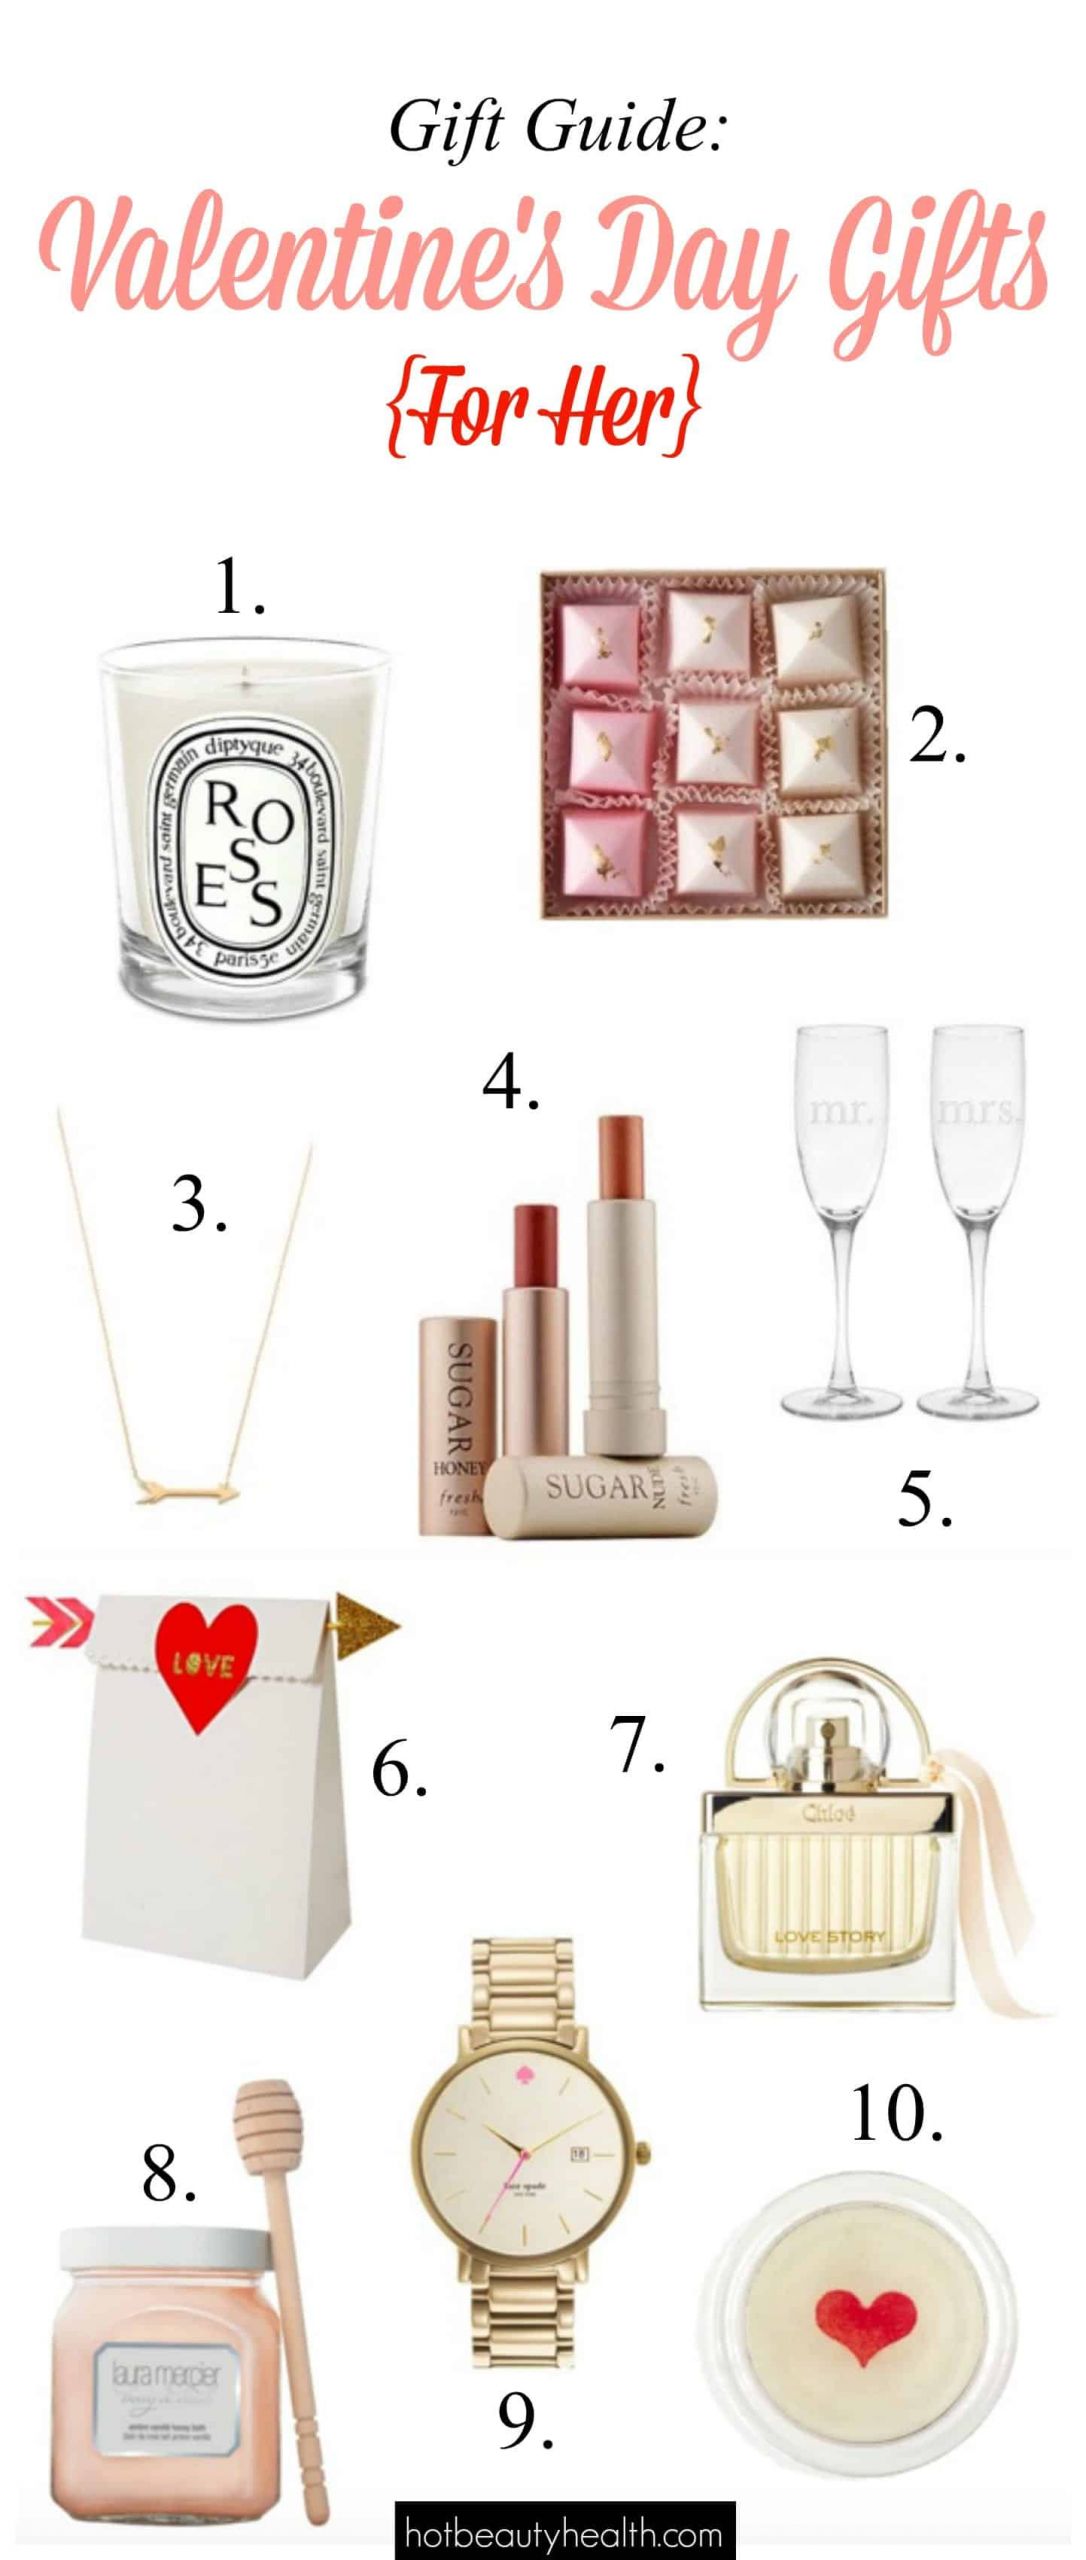 Cute Valentines Day Ideas For Her
 10 Cute Valentine s Day Gifts for Her